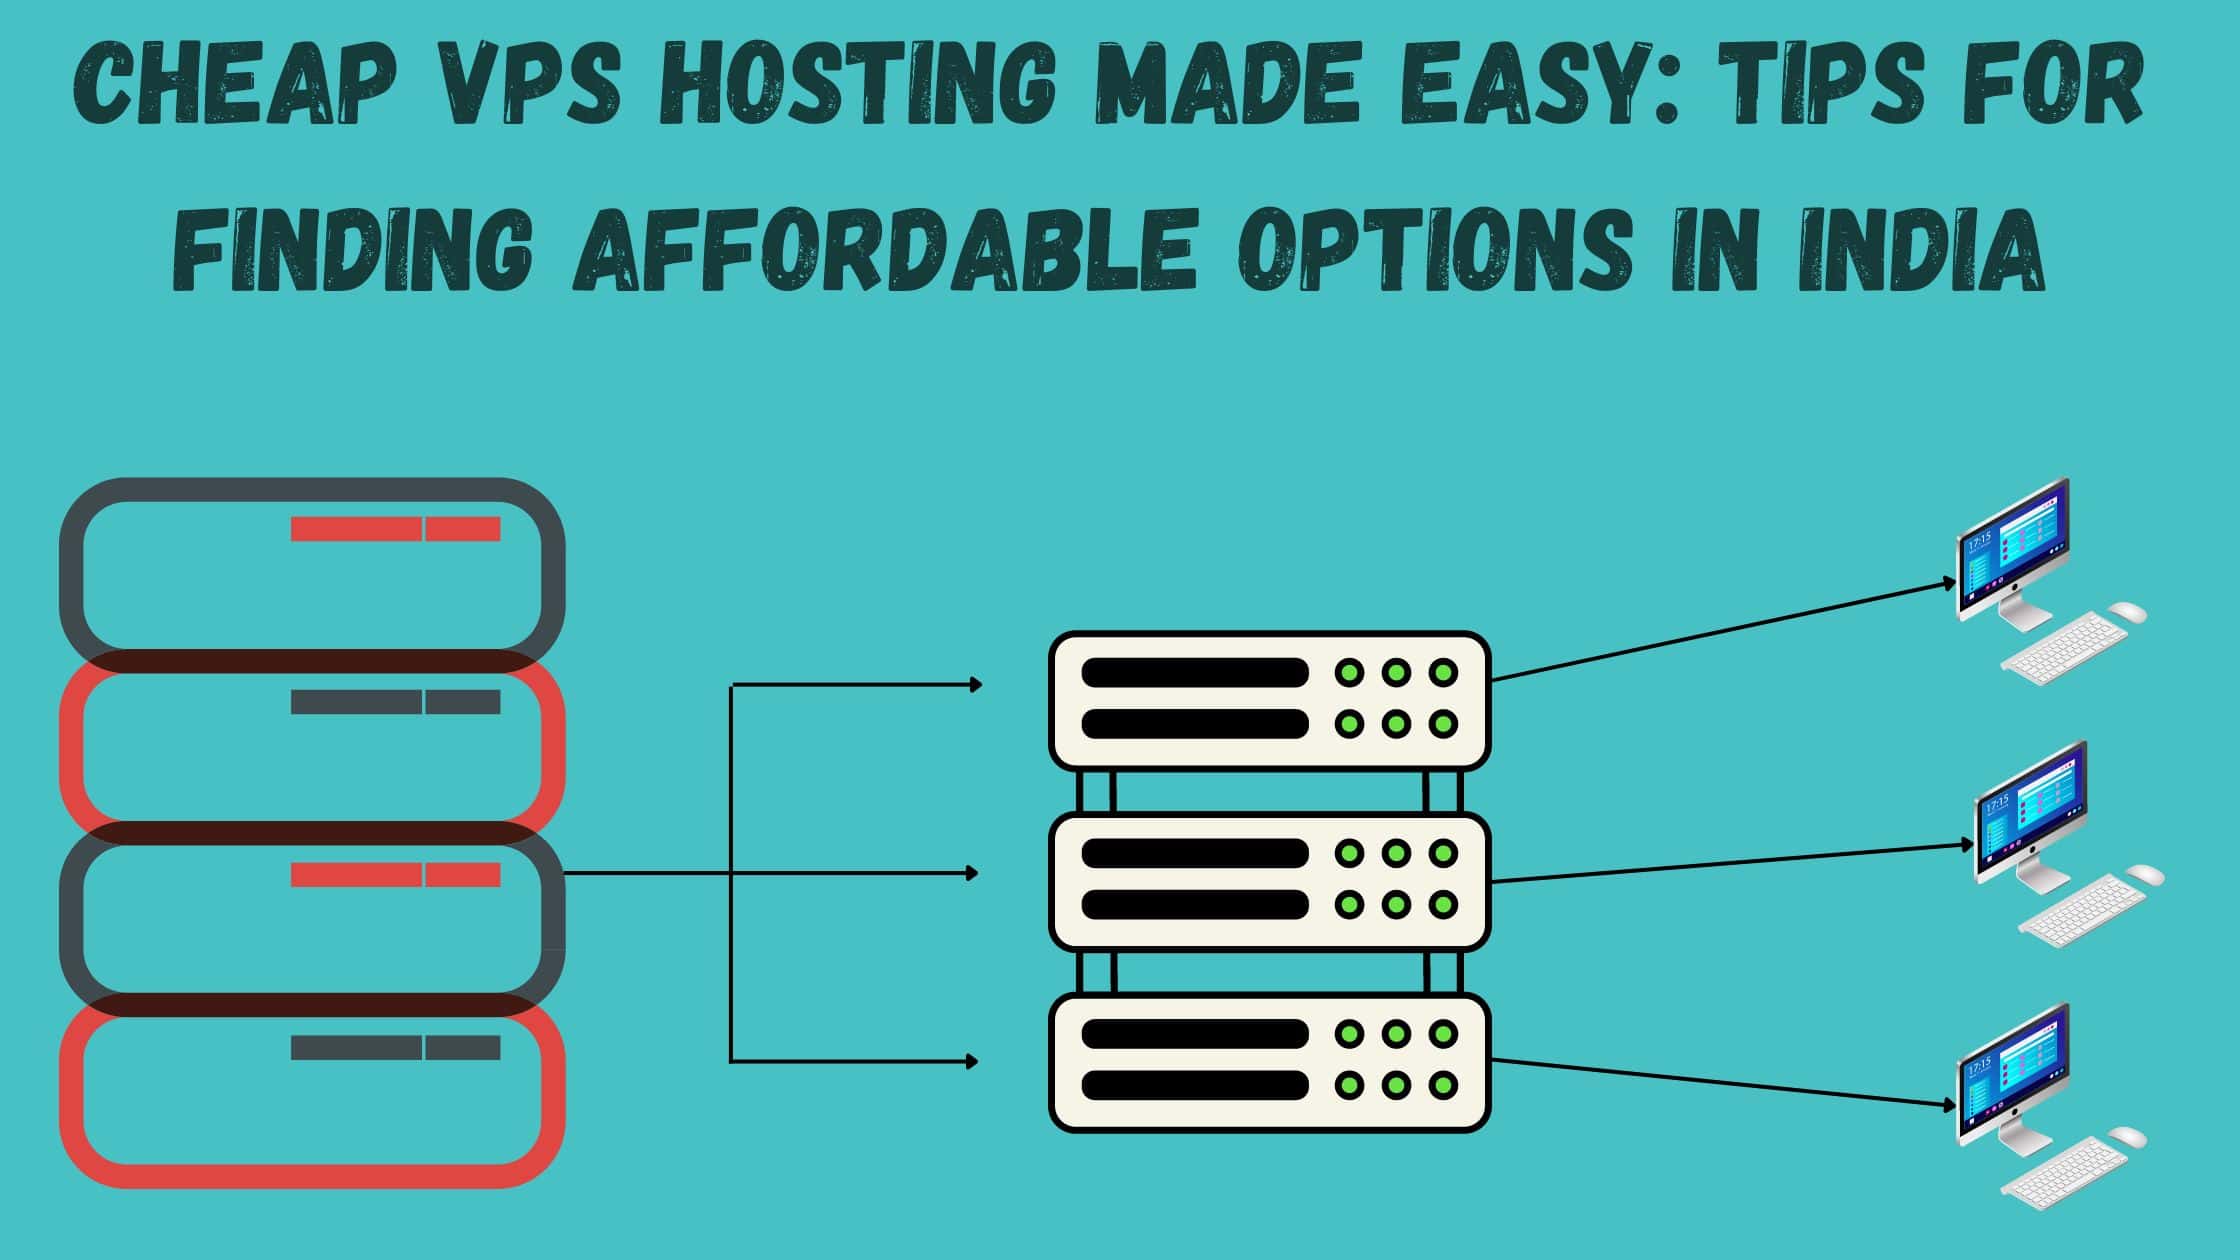 Cheap VPS Hosting Made Easy: Tips for Finding Affordable Options in India